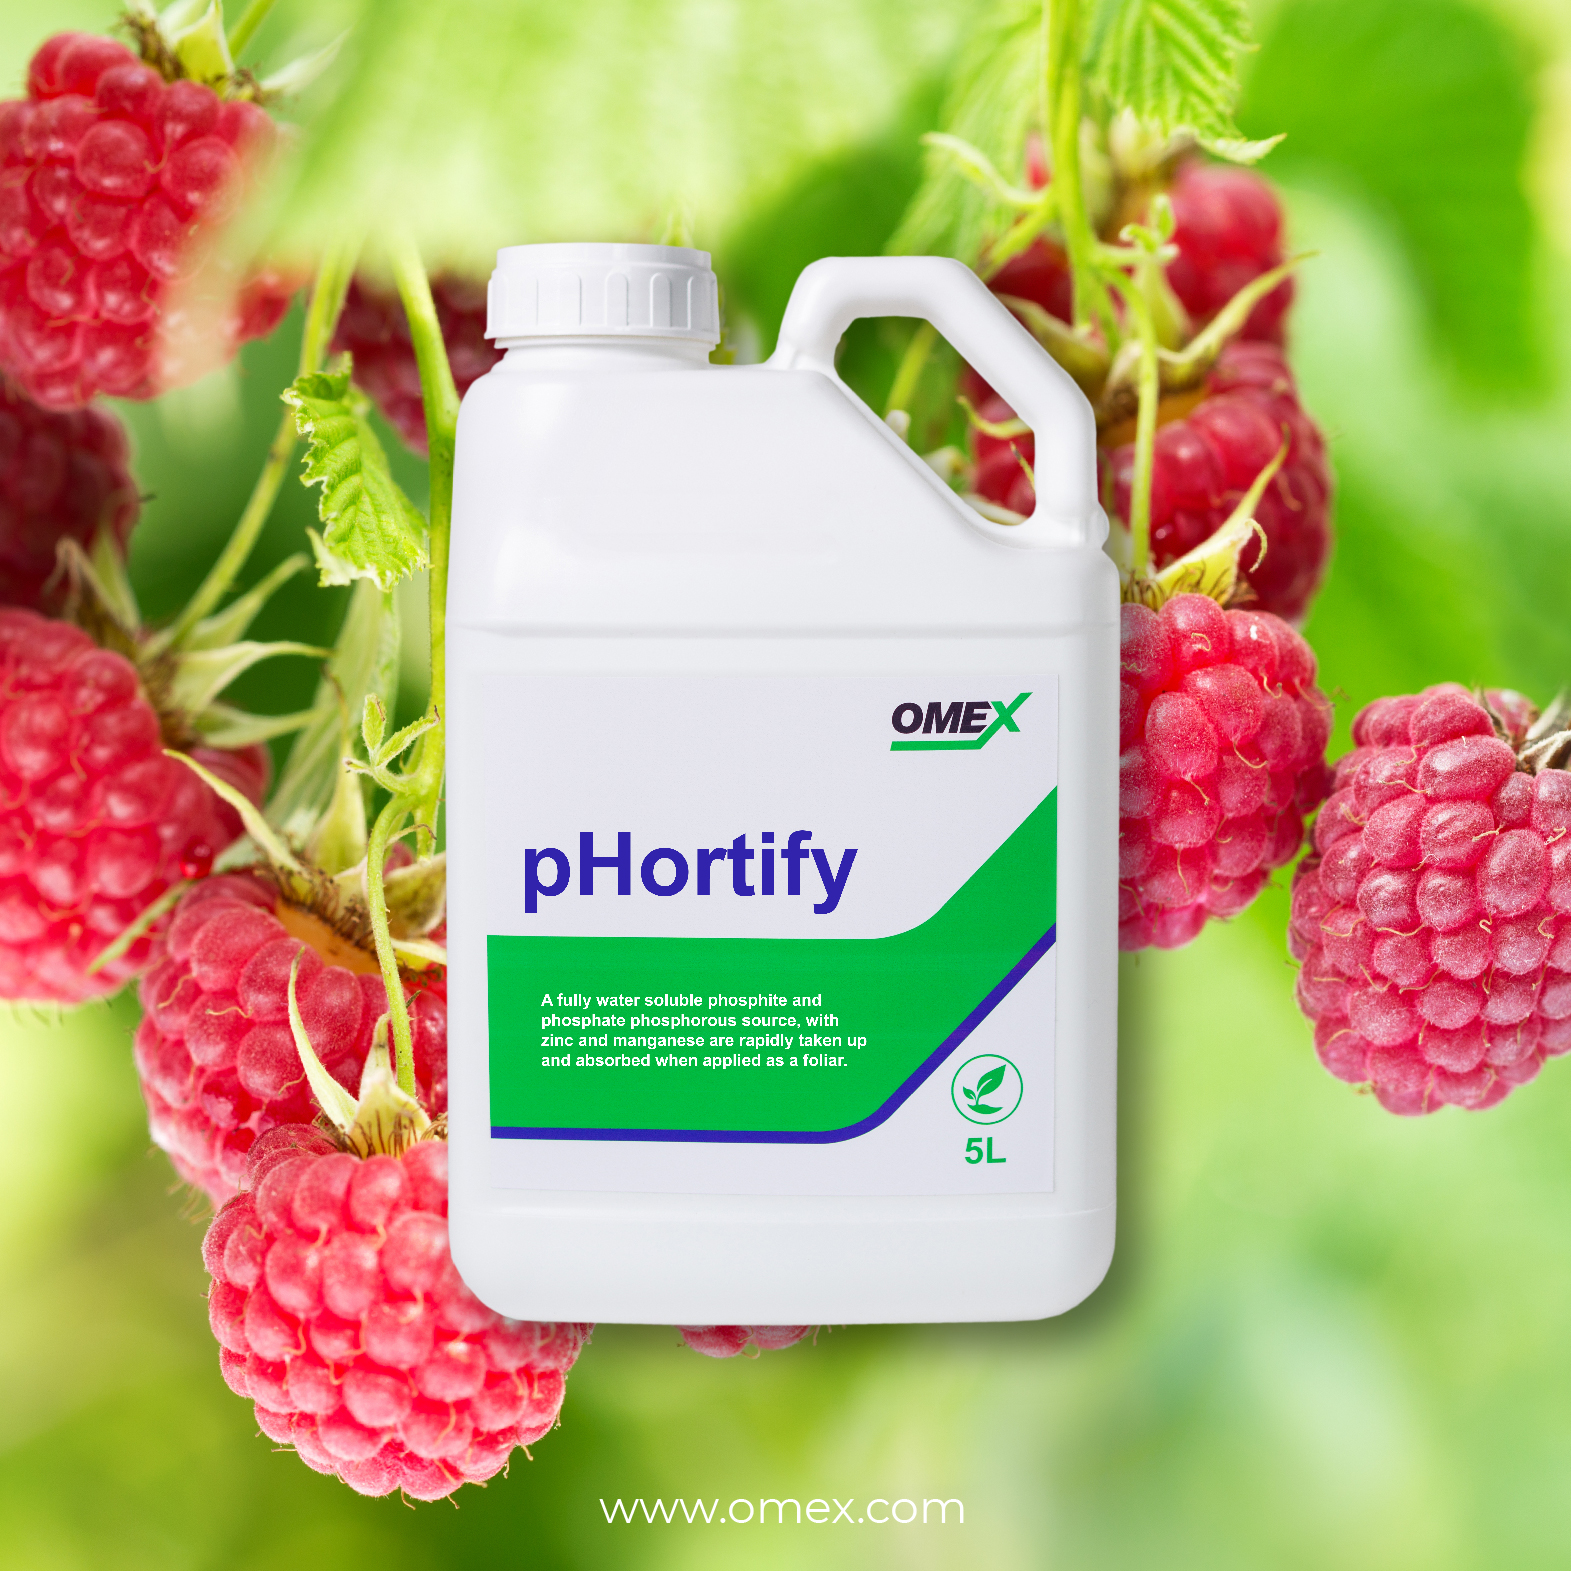 benefits of phortify and plants health promoters